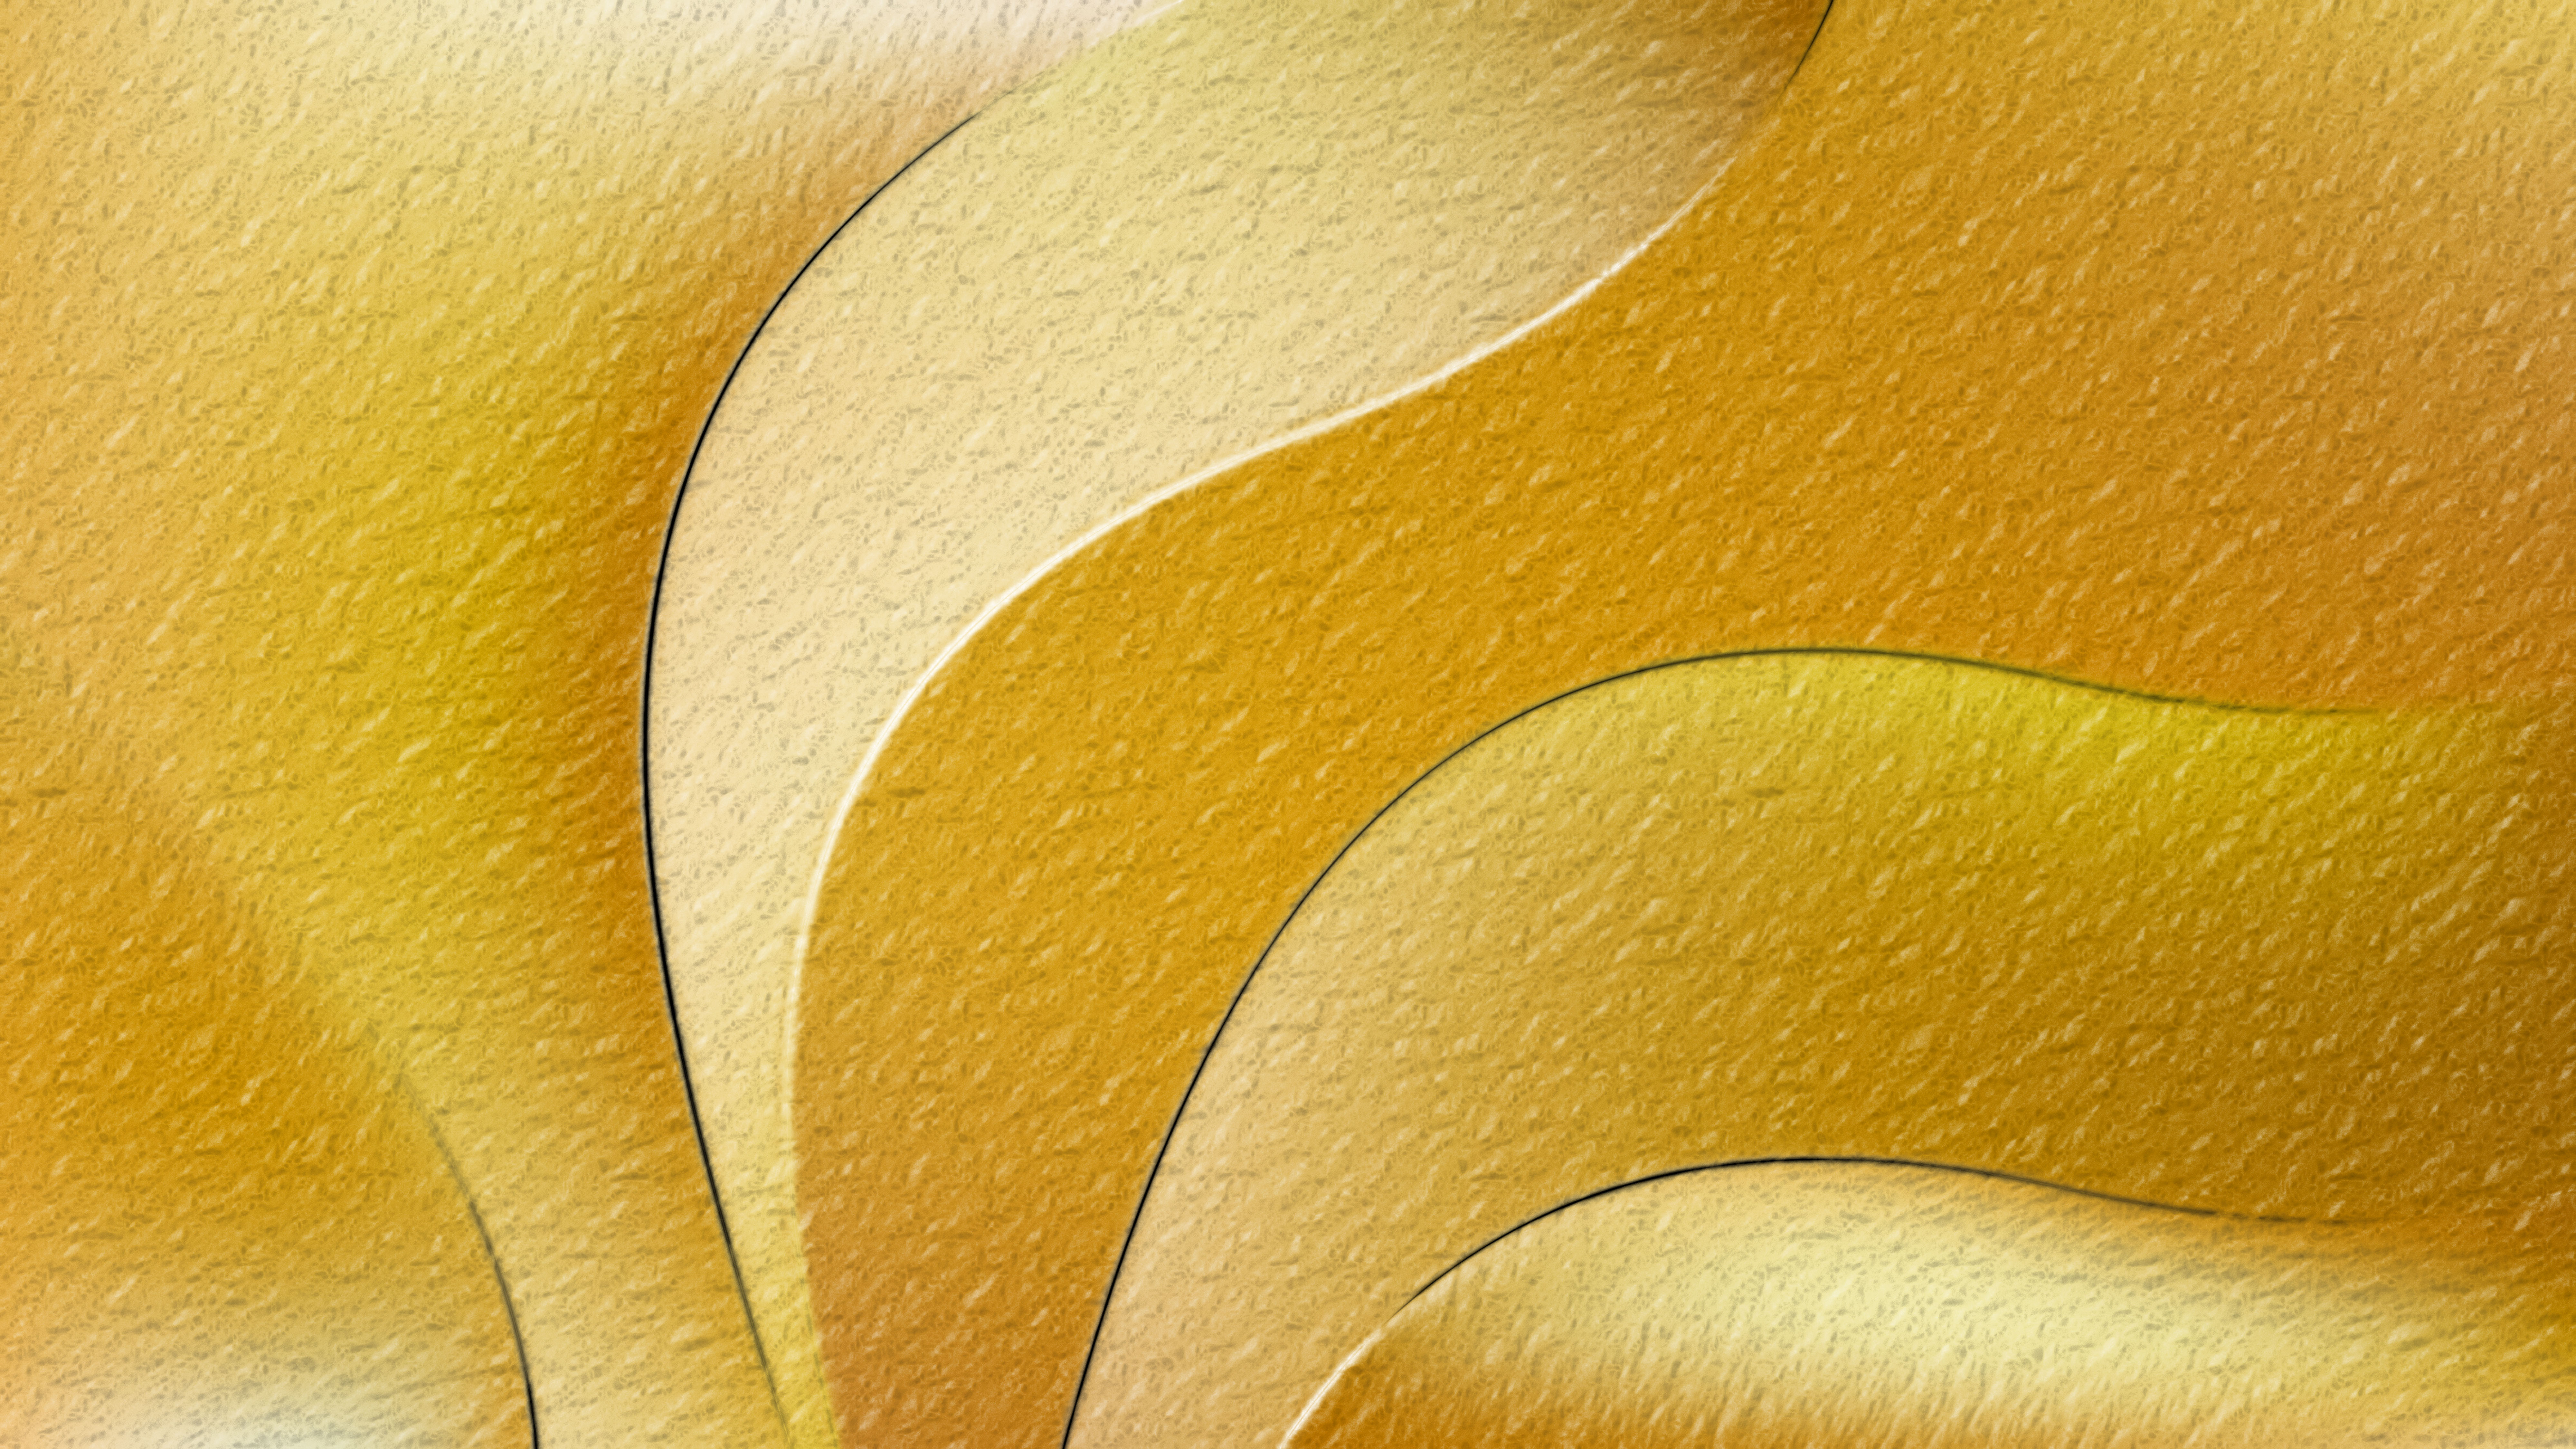 Gold Texture Images  Free Vector PNG  PSD Background  Texture Photos   rawpixel